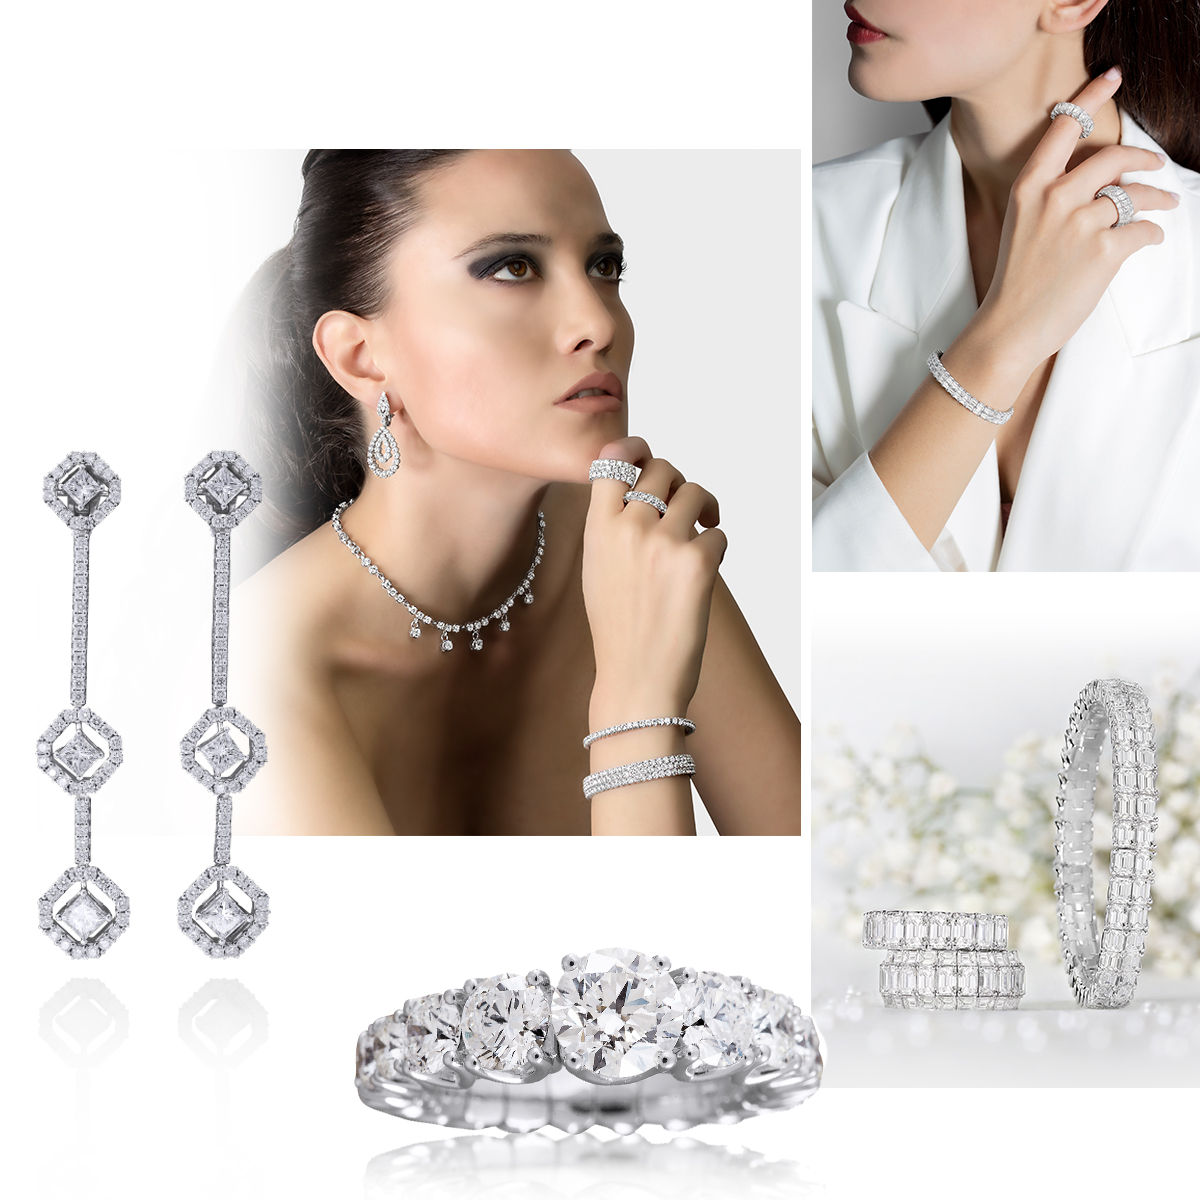 clockwise from upper right – Model wearing PICCHIOTTI Xpandable™ Bridal diamond bracelet and rings, PICCHIOTTI two row Xpandable Emerald Cut Lover bracelet, PICCHIOTTI Xpandable™ Emerald Cut Lover Rings, PICCHIOTTI Xpandable Bridal Ring with graduated round diamonds, PICCHIOTTI Diamond Drop earrings, Model wearing PICCHIOTTI Bridal Collection jewelry